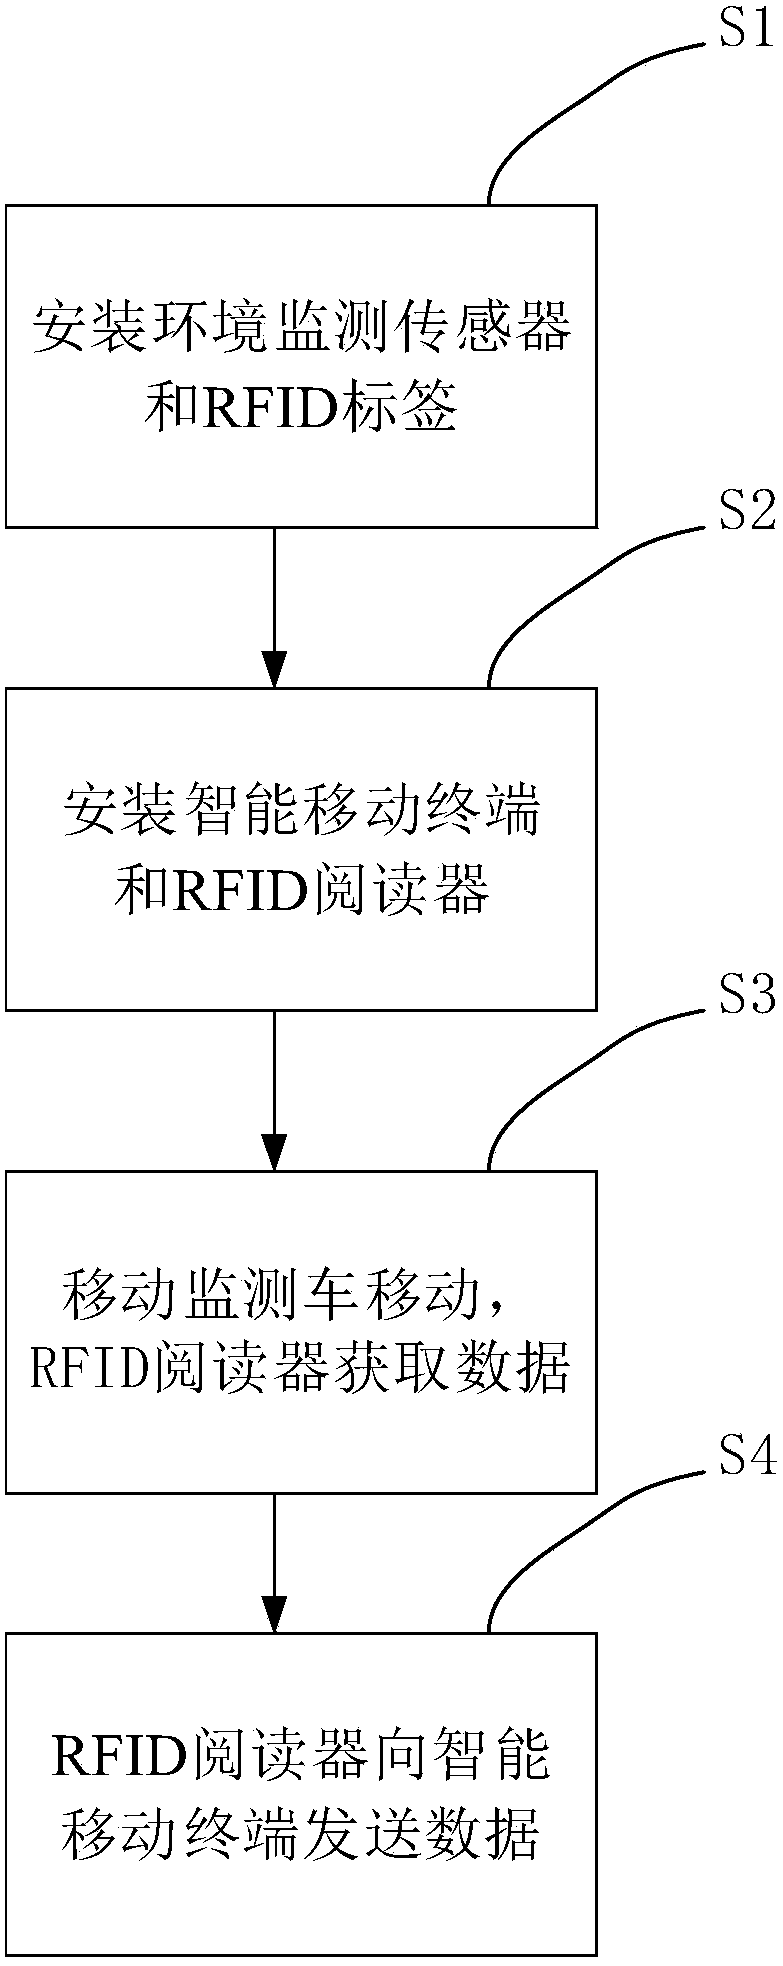 A vehicle-mounted RFID environmental monitoring system and method